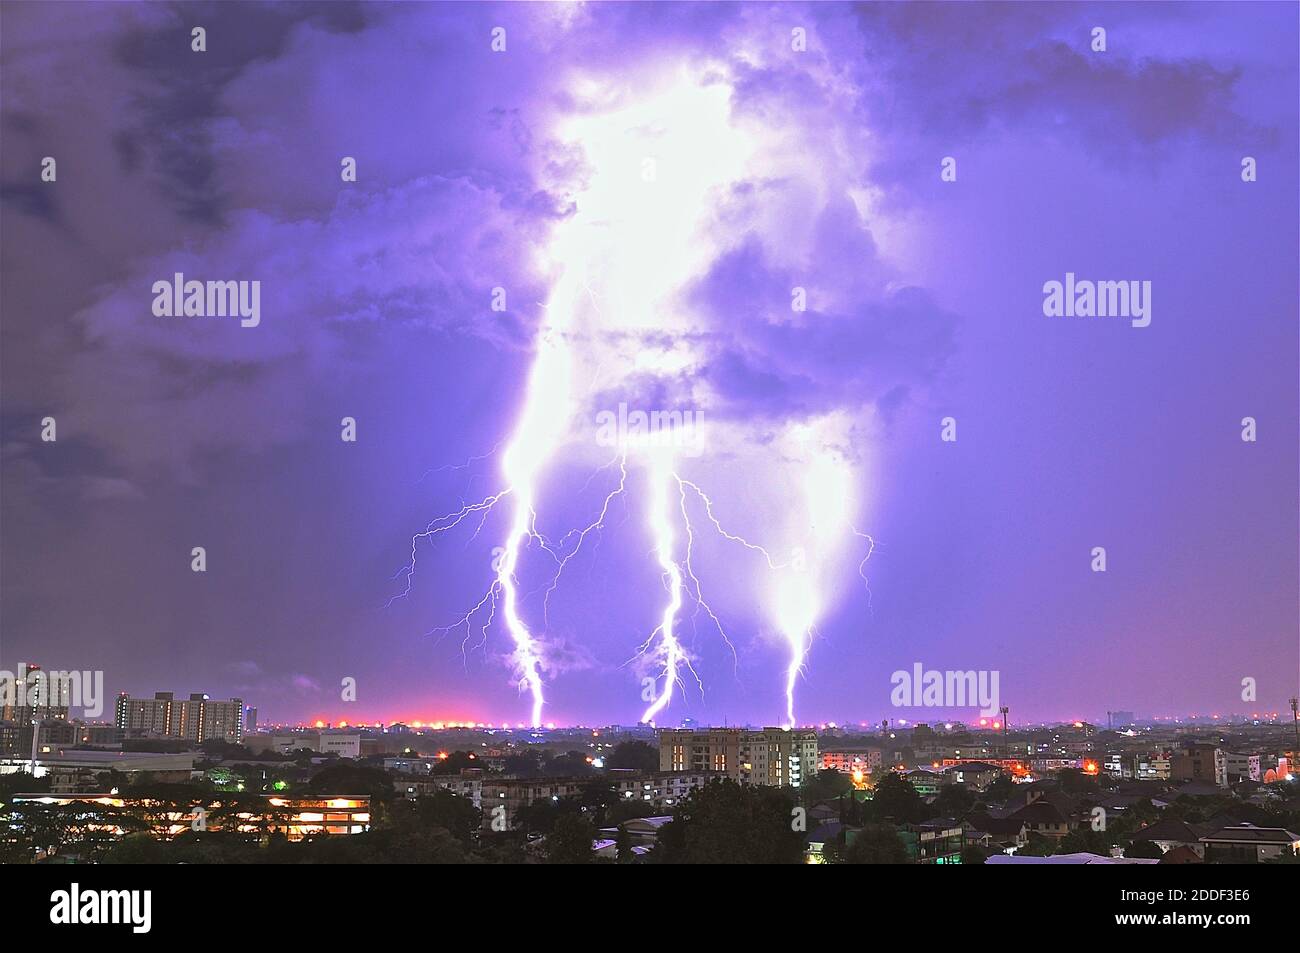 Electrical storm showing three lightening bolts hitting earth over a night time townscape. Stock Photo